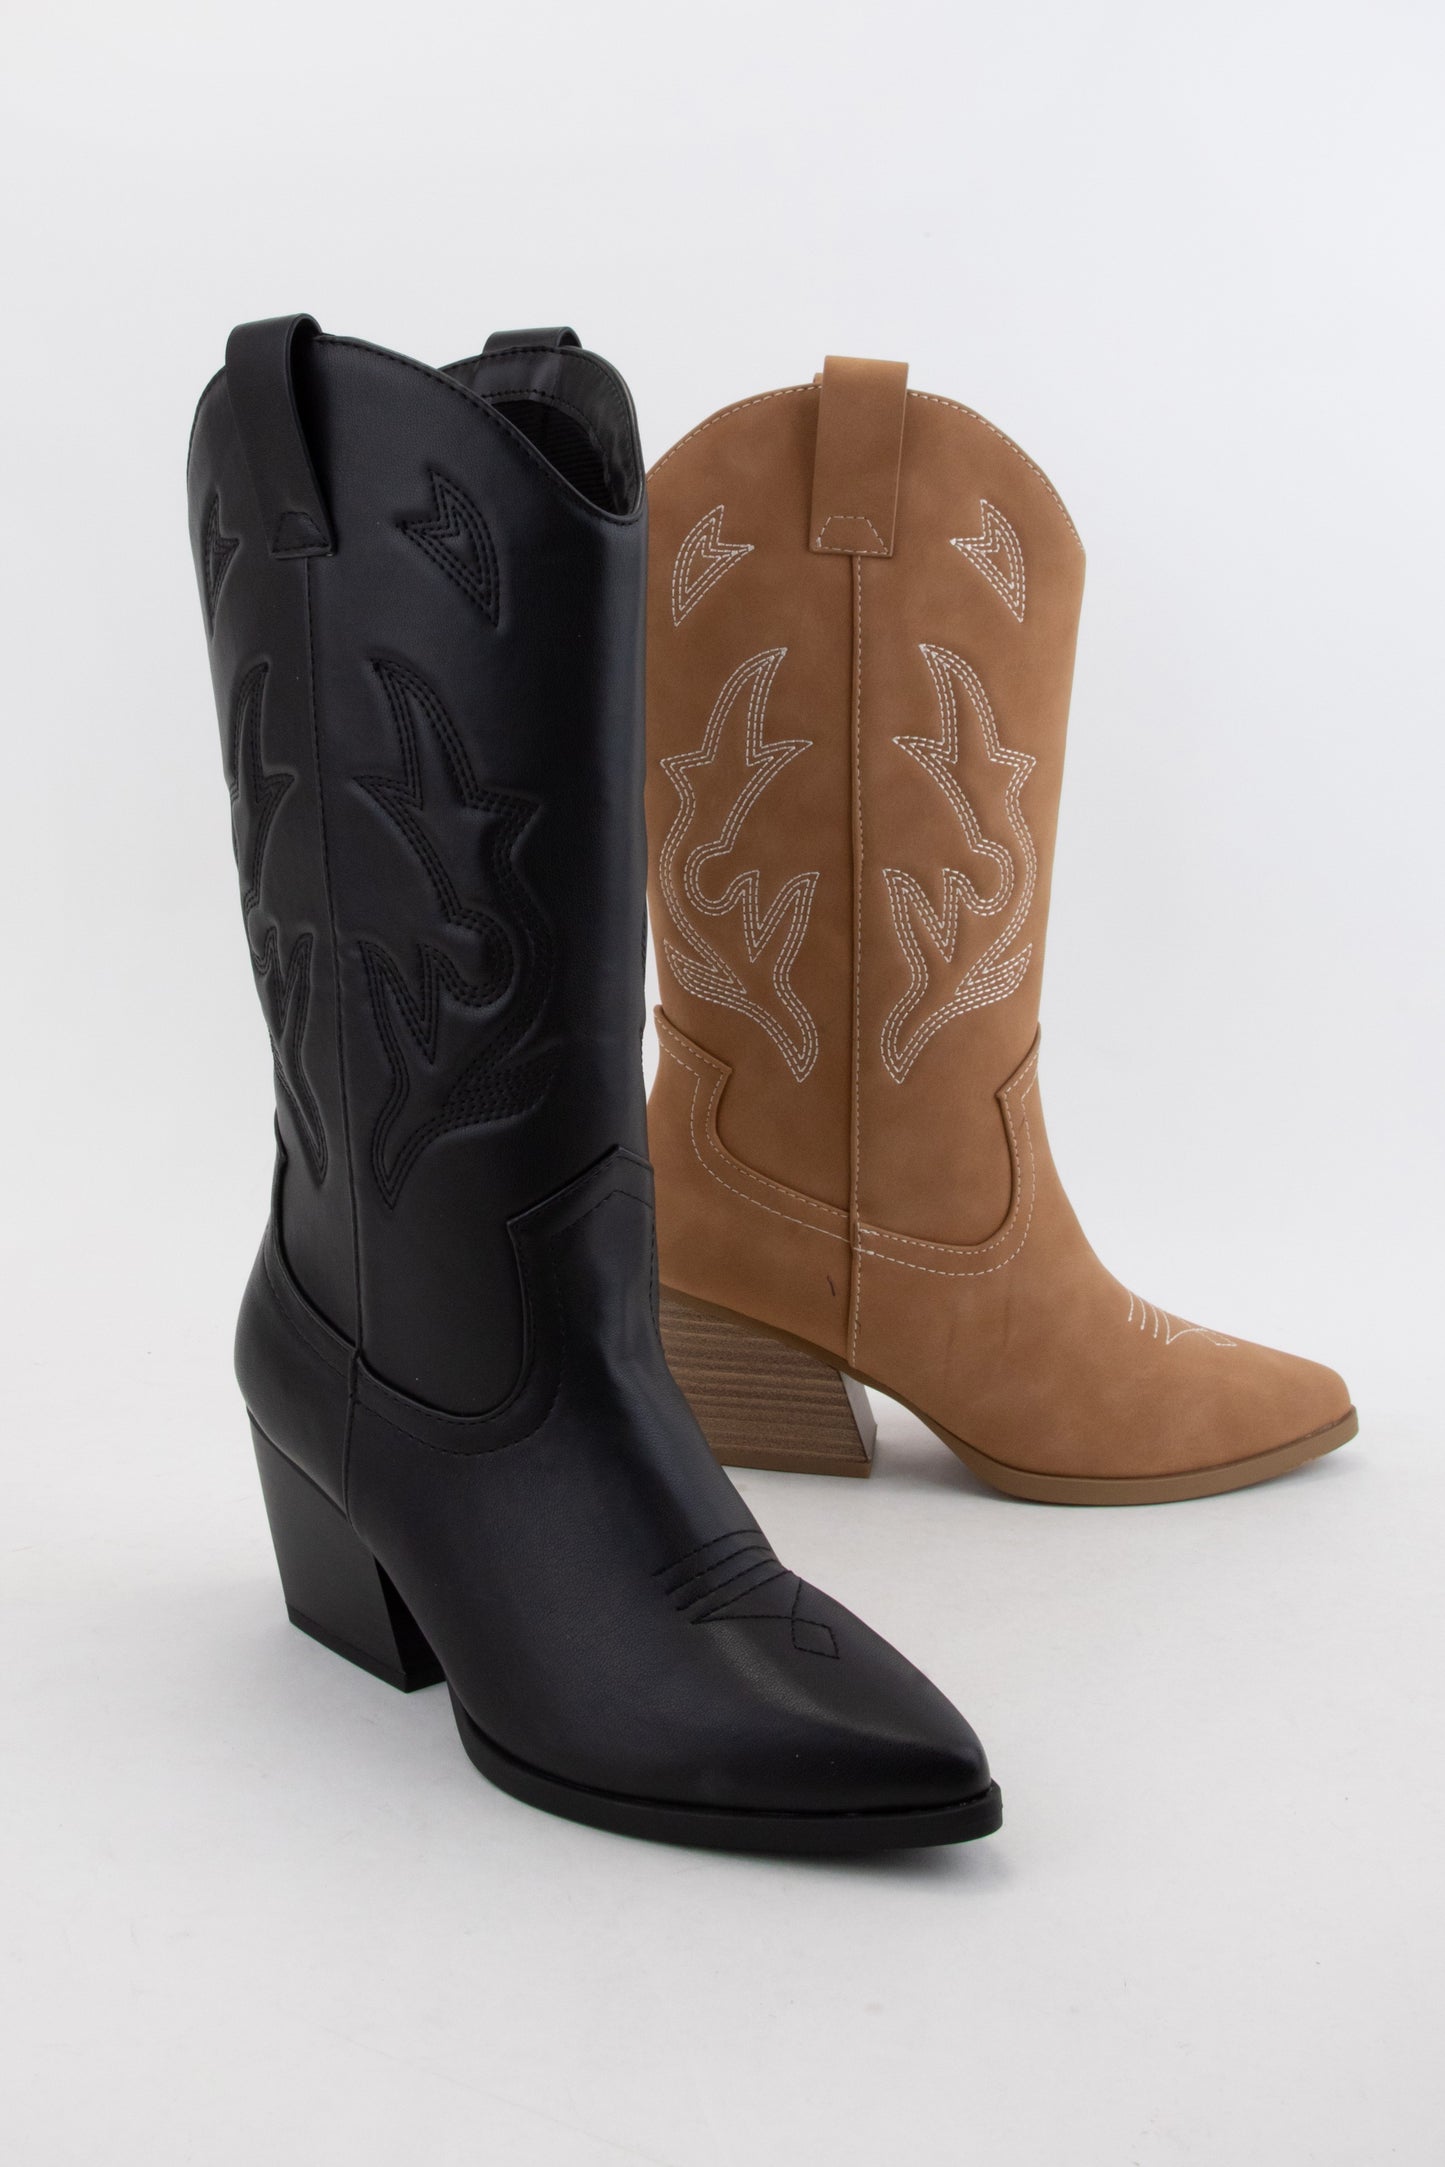 Black Embroidered Western Boots